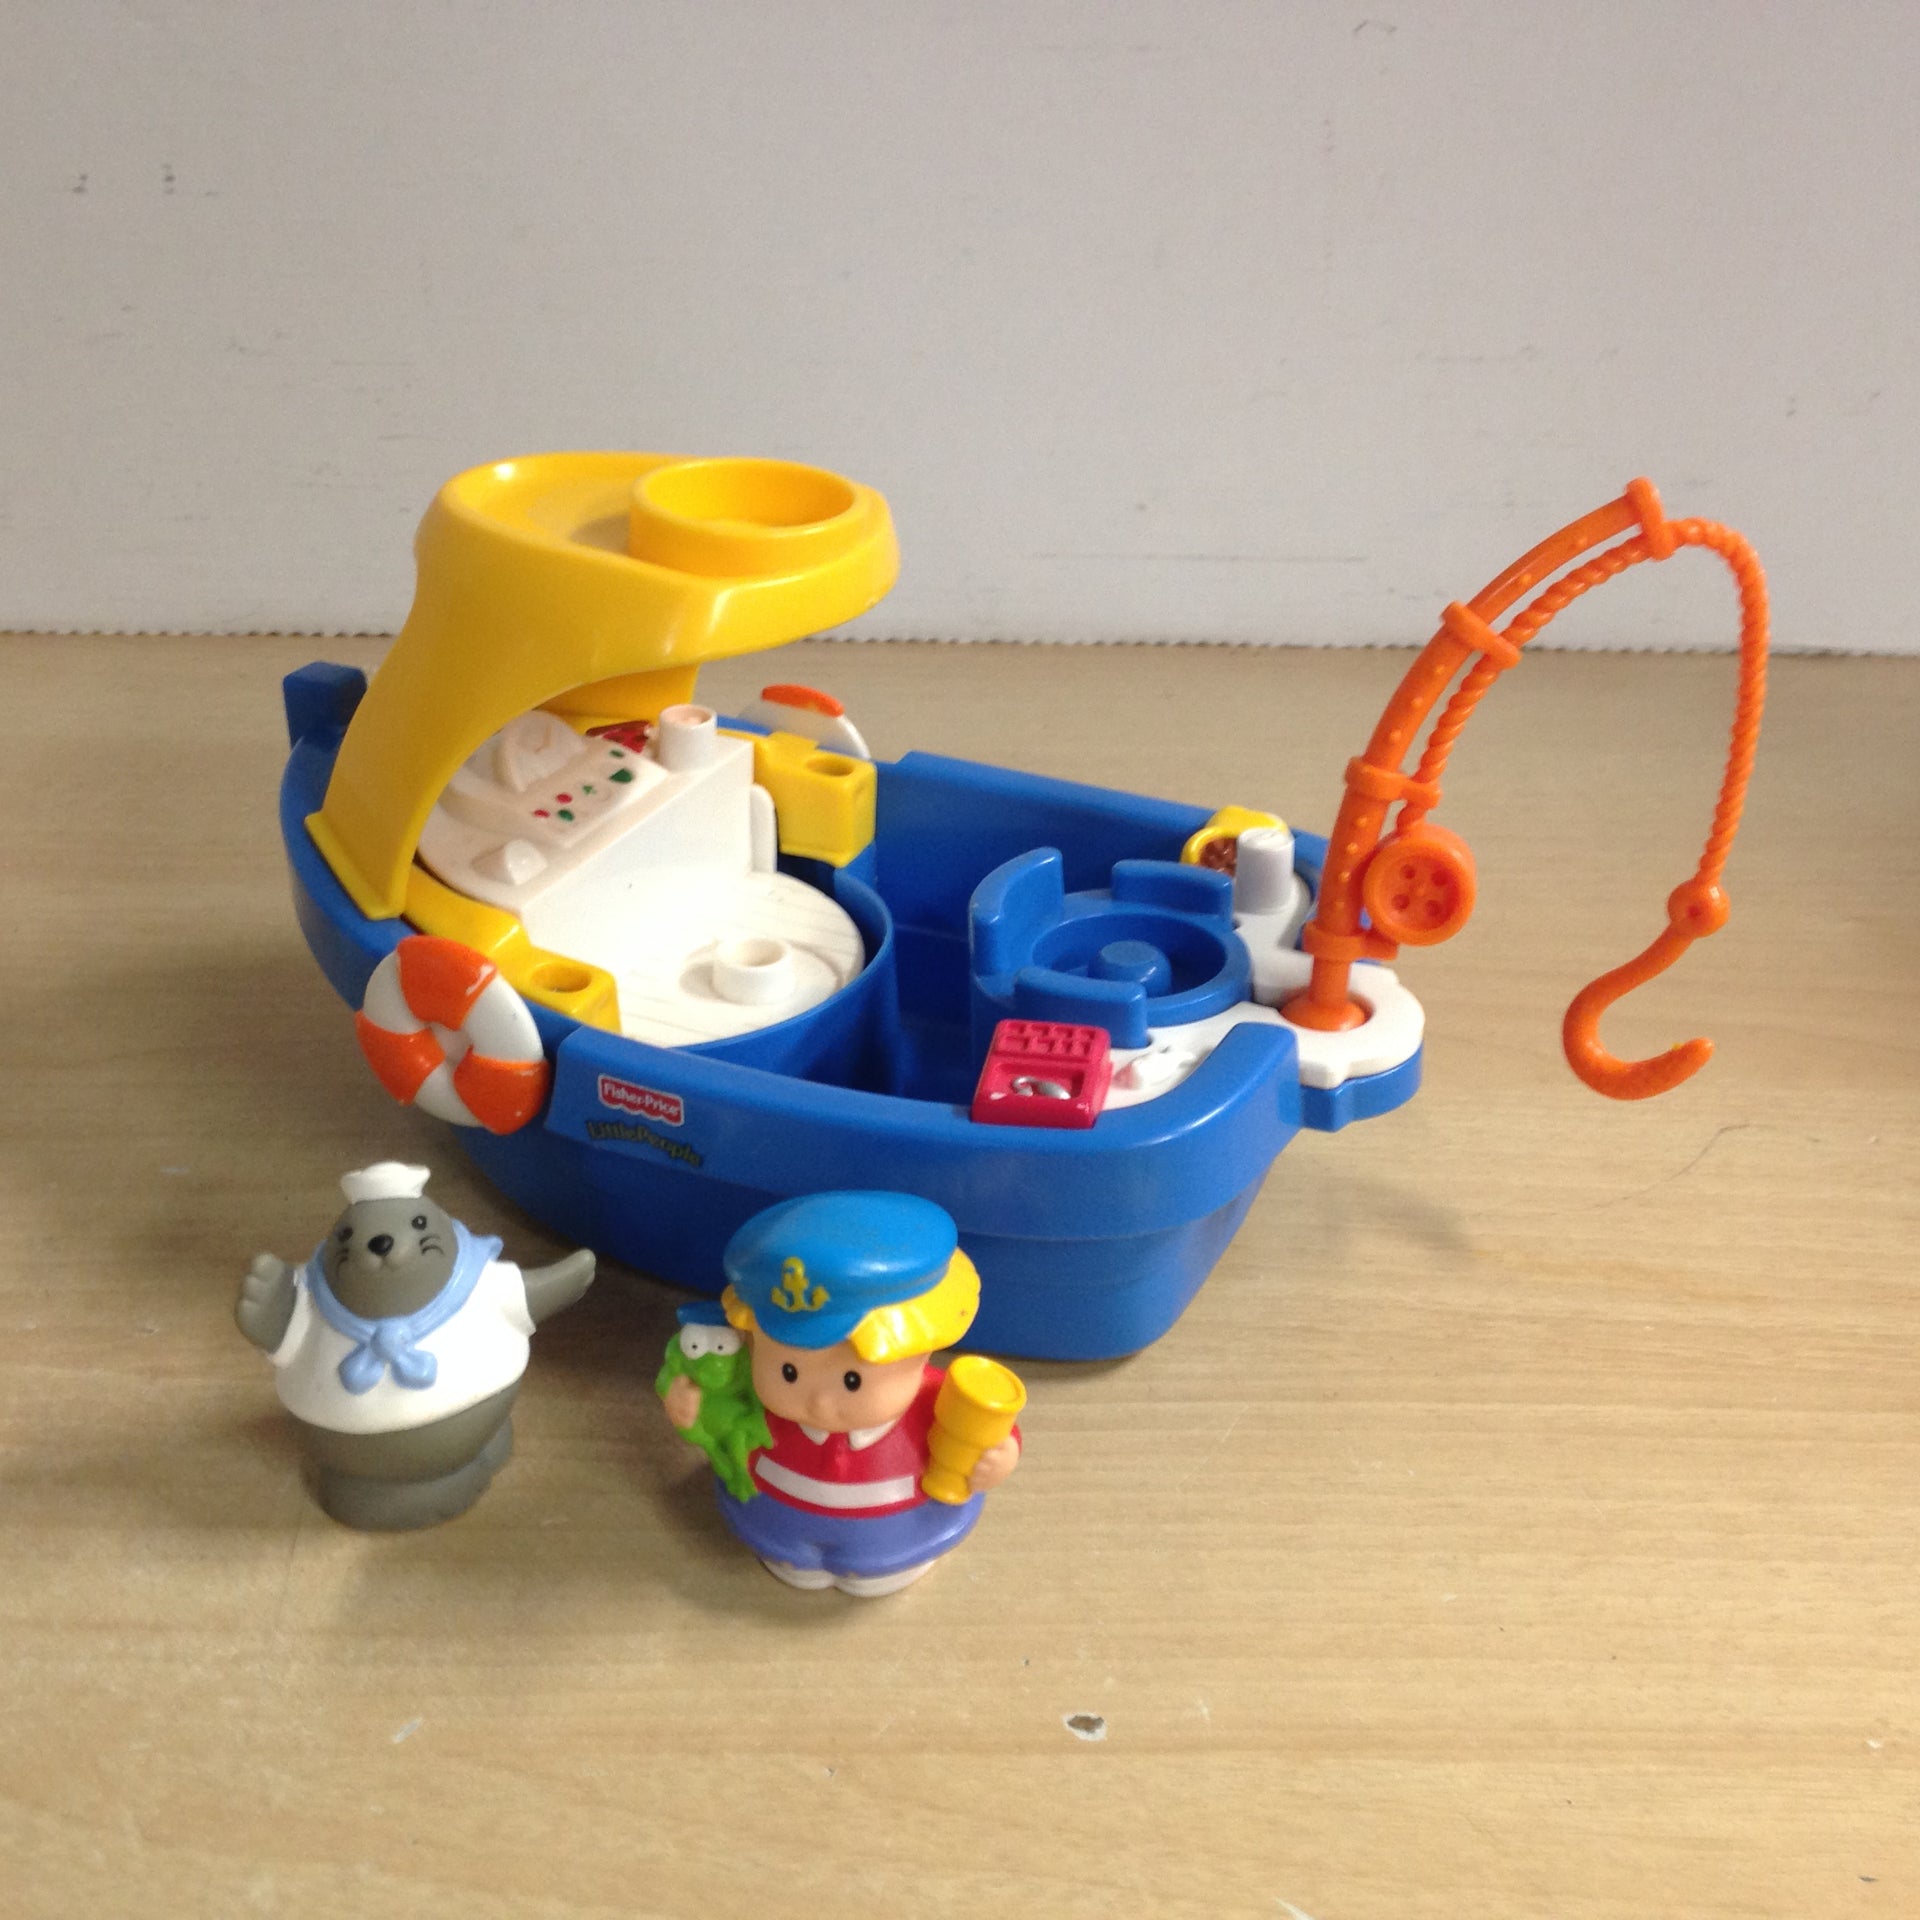 FISHER PRICE Little People SAIL 'N FLOAT FISHING BOAT 